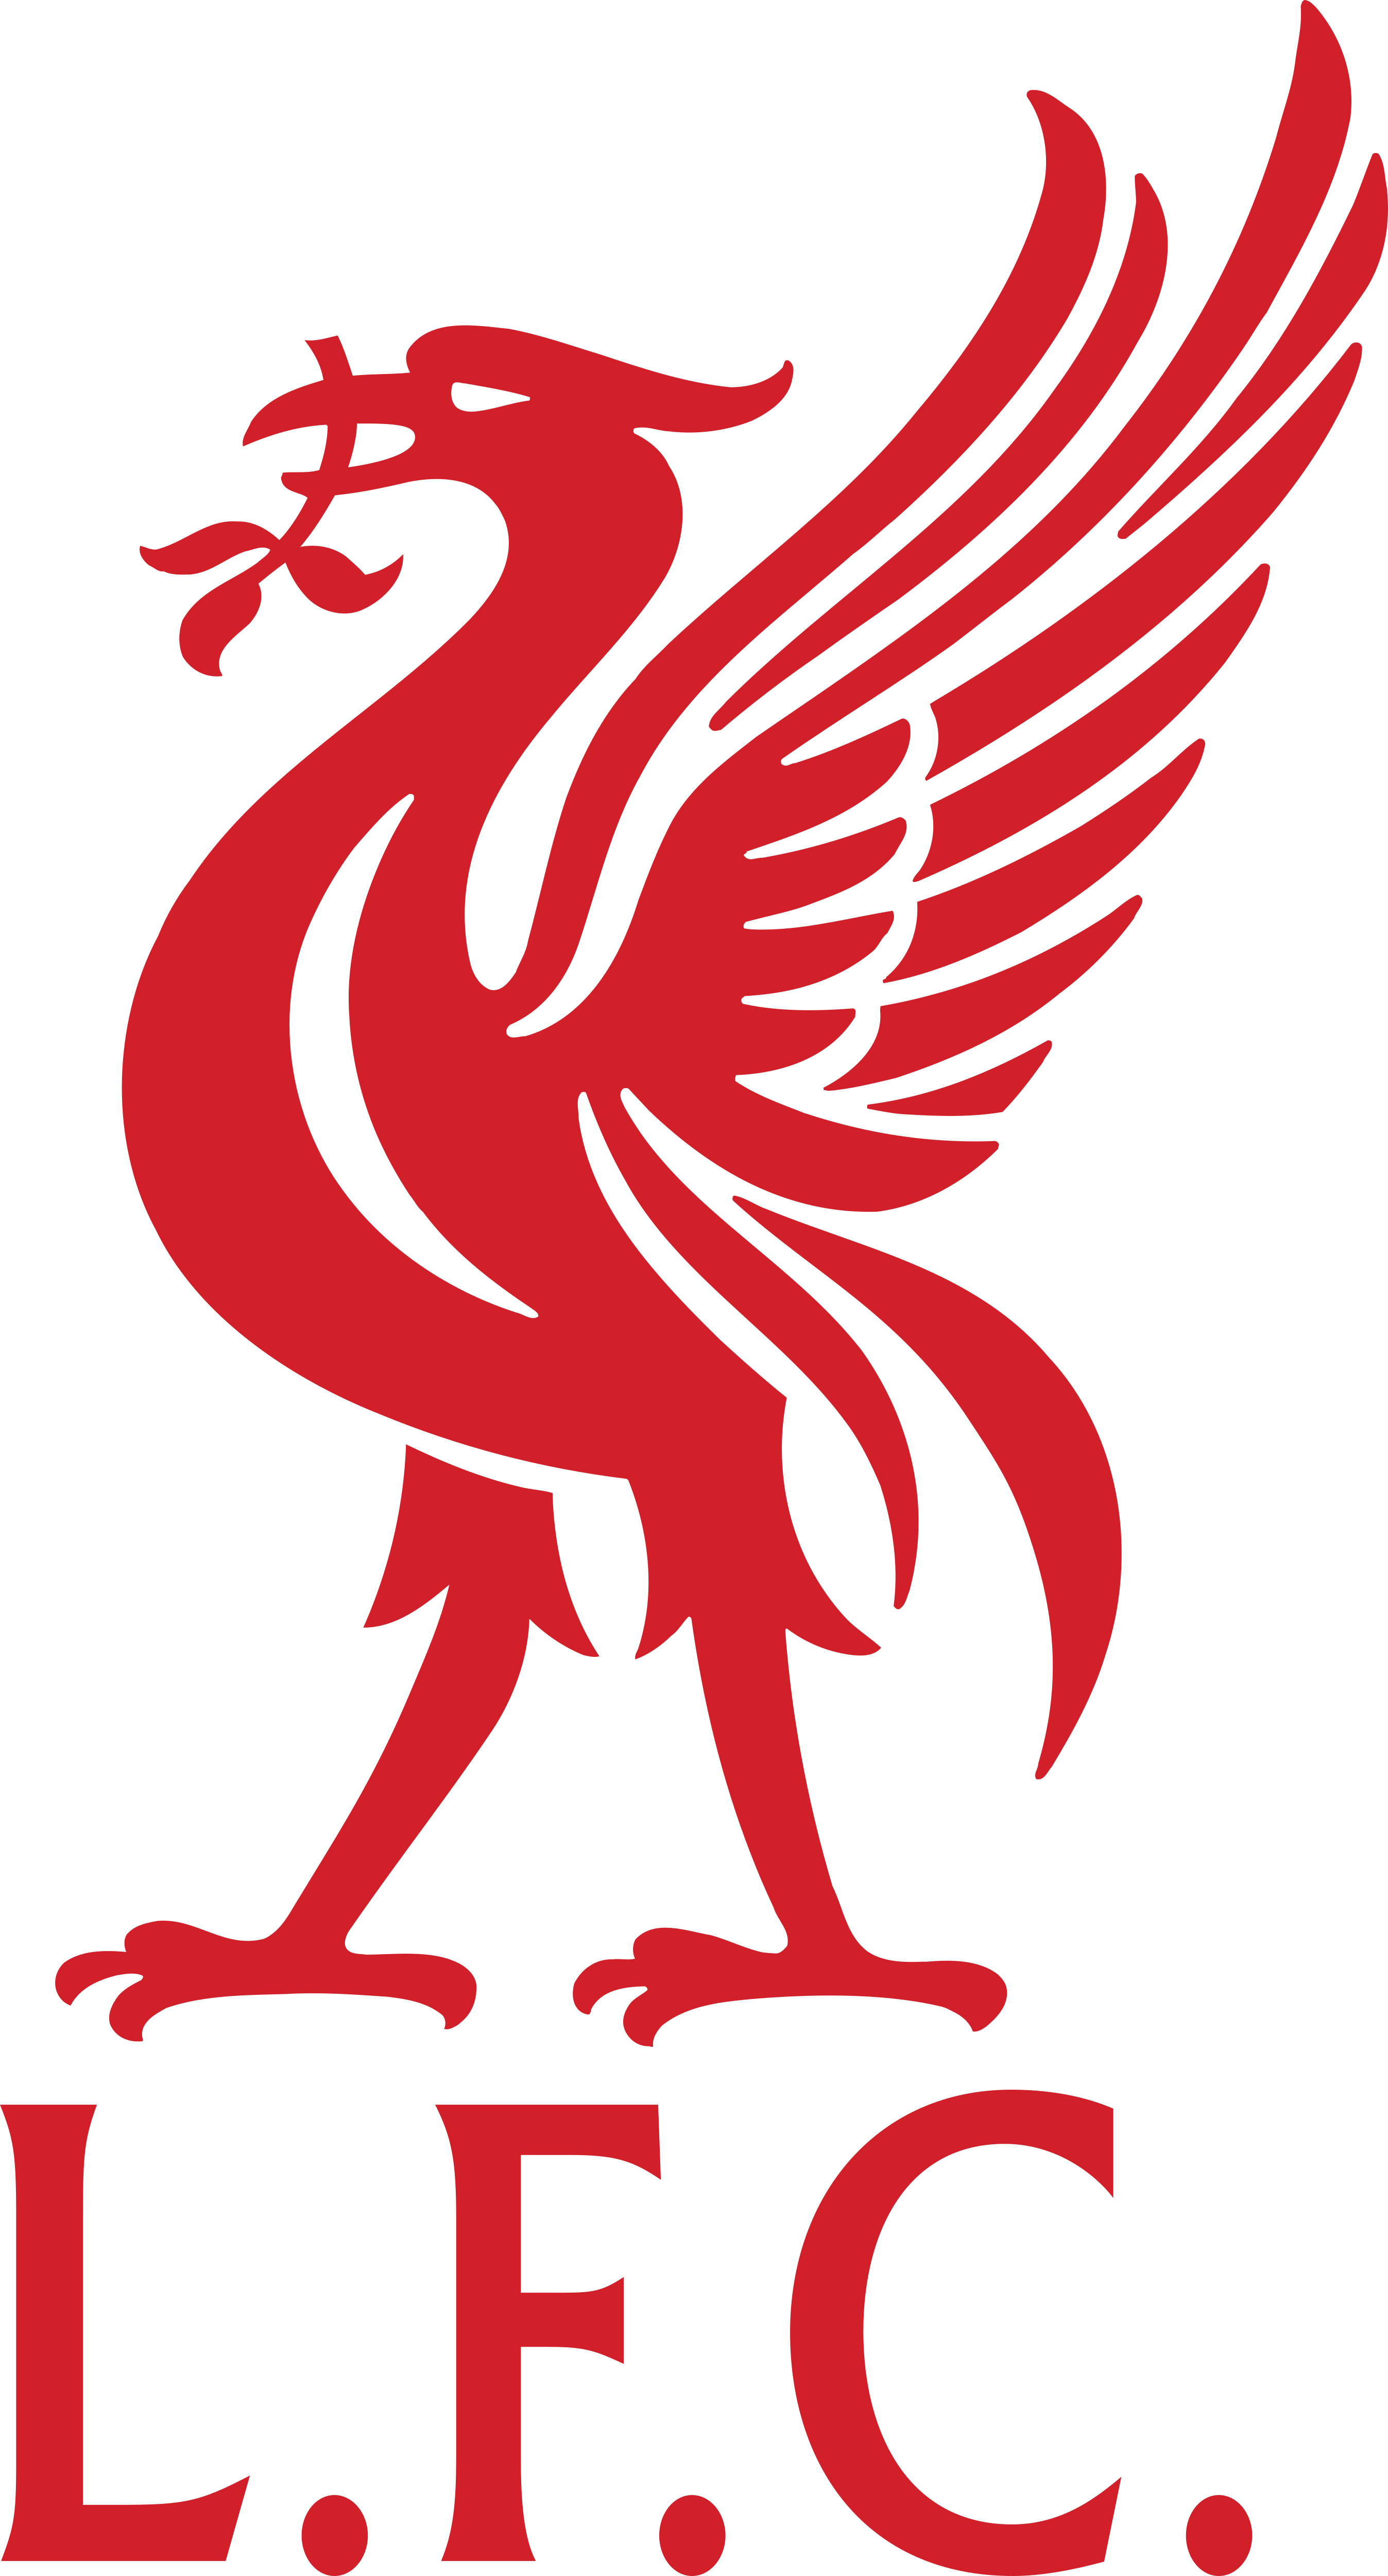 Download Liverpool Fc Logo Hd Pictures